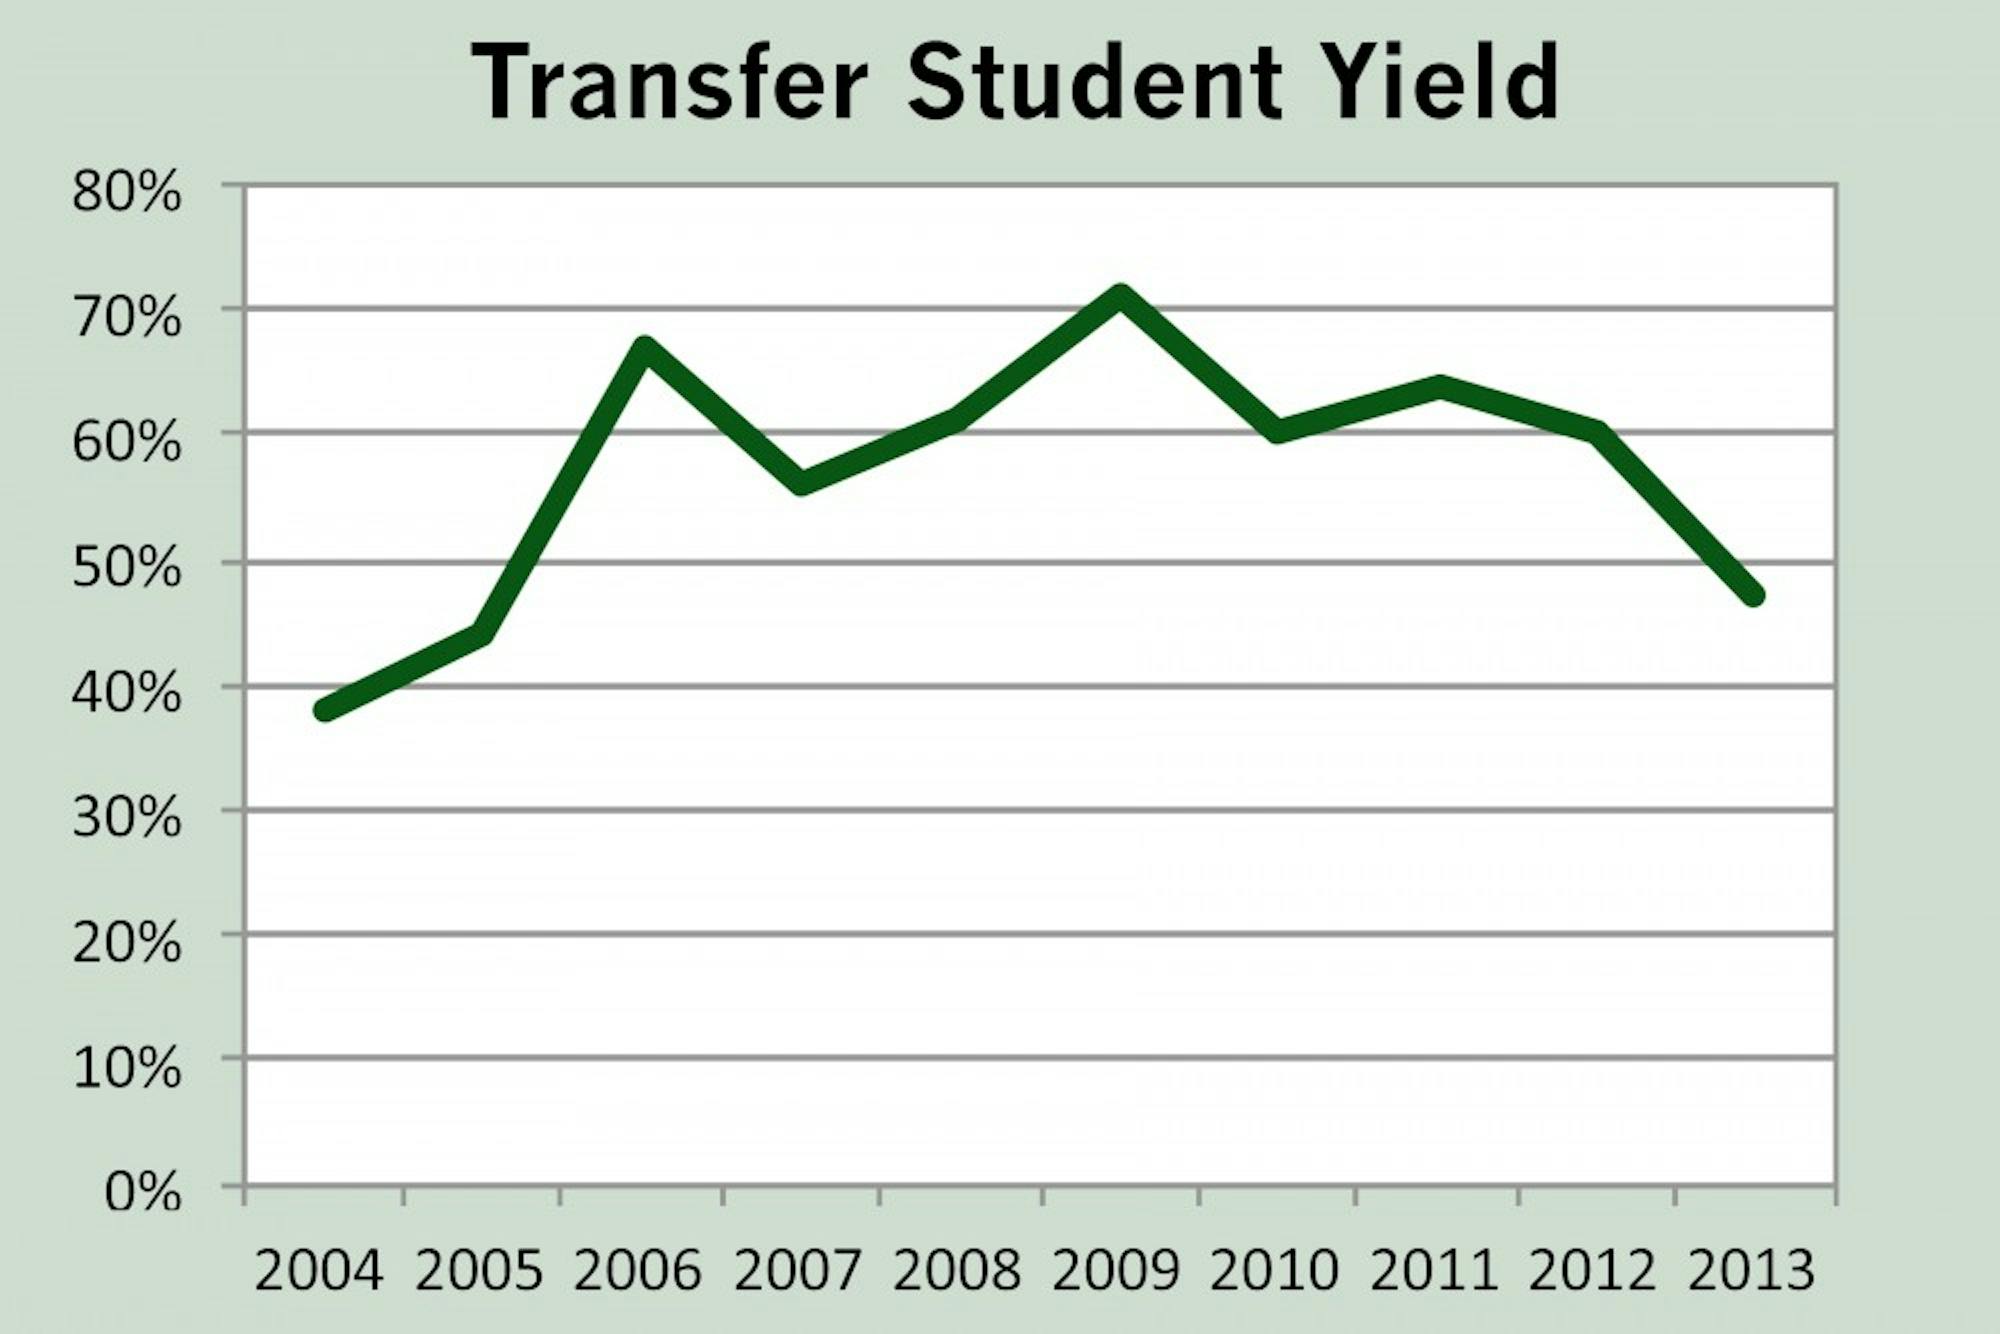 Dean of Admissions and Financial Aid Maria Laskaris said she was unsure what has caused the declining transfer yield.